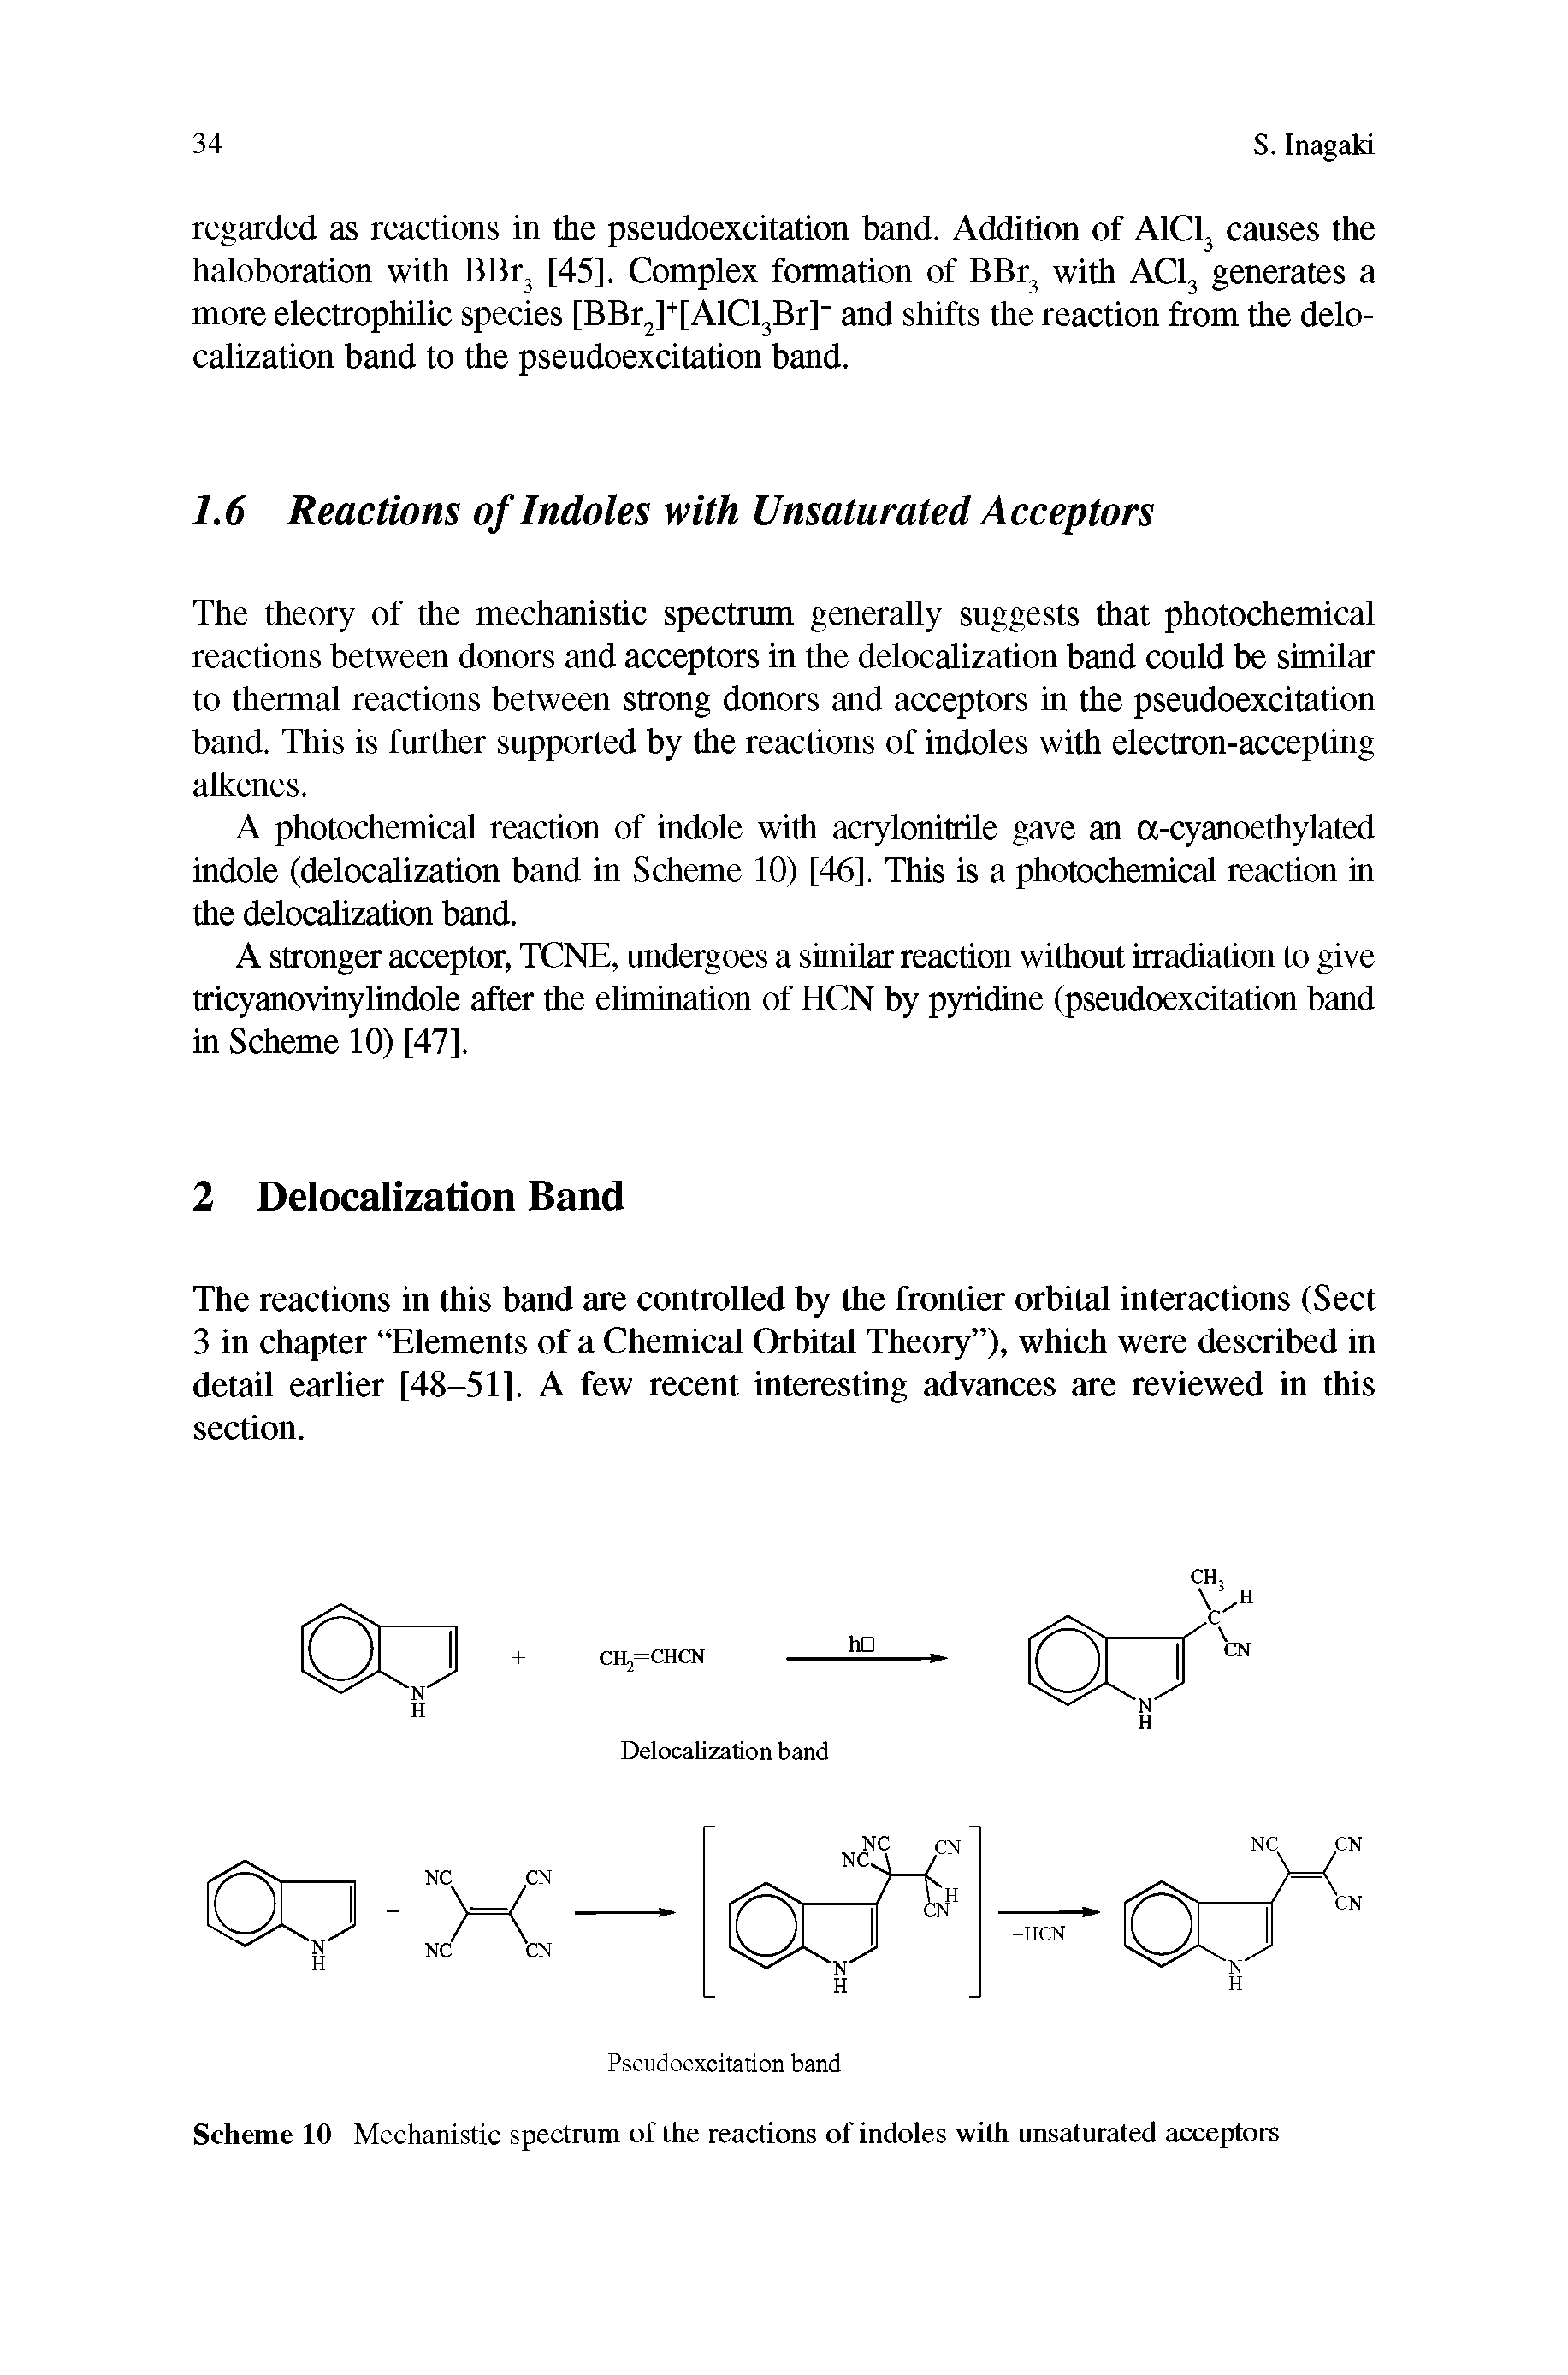 Scheme 10 Mechanistic spectrum of the reactions of indoles with unsaturated acceptors...